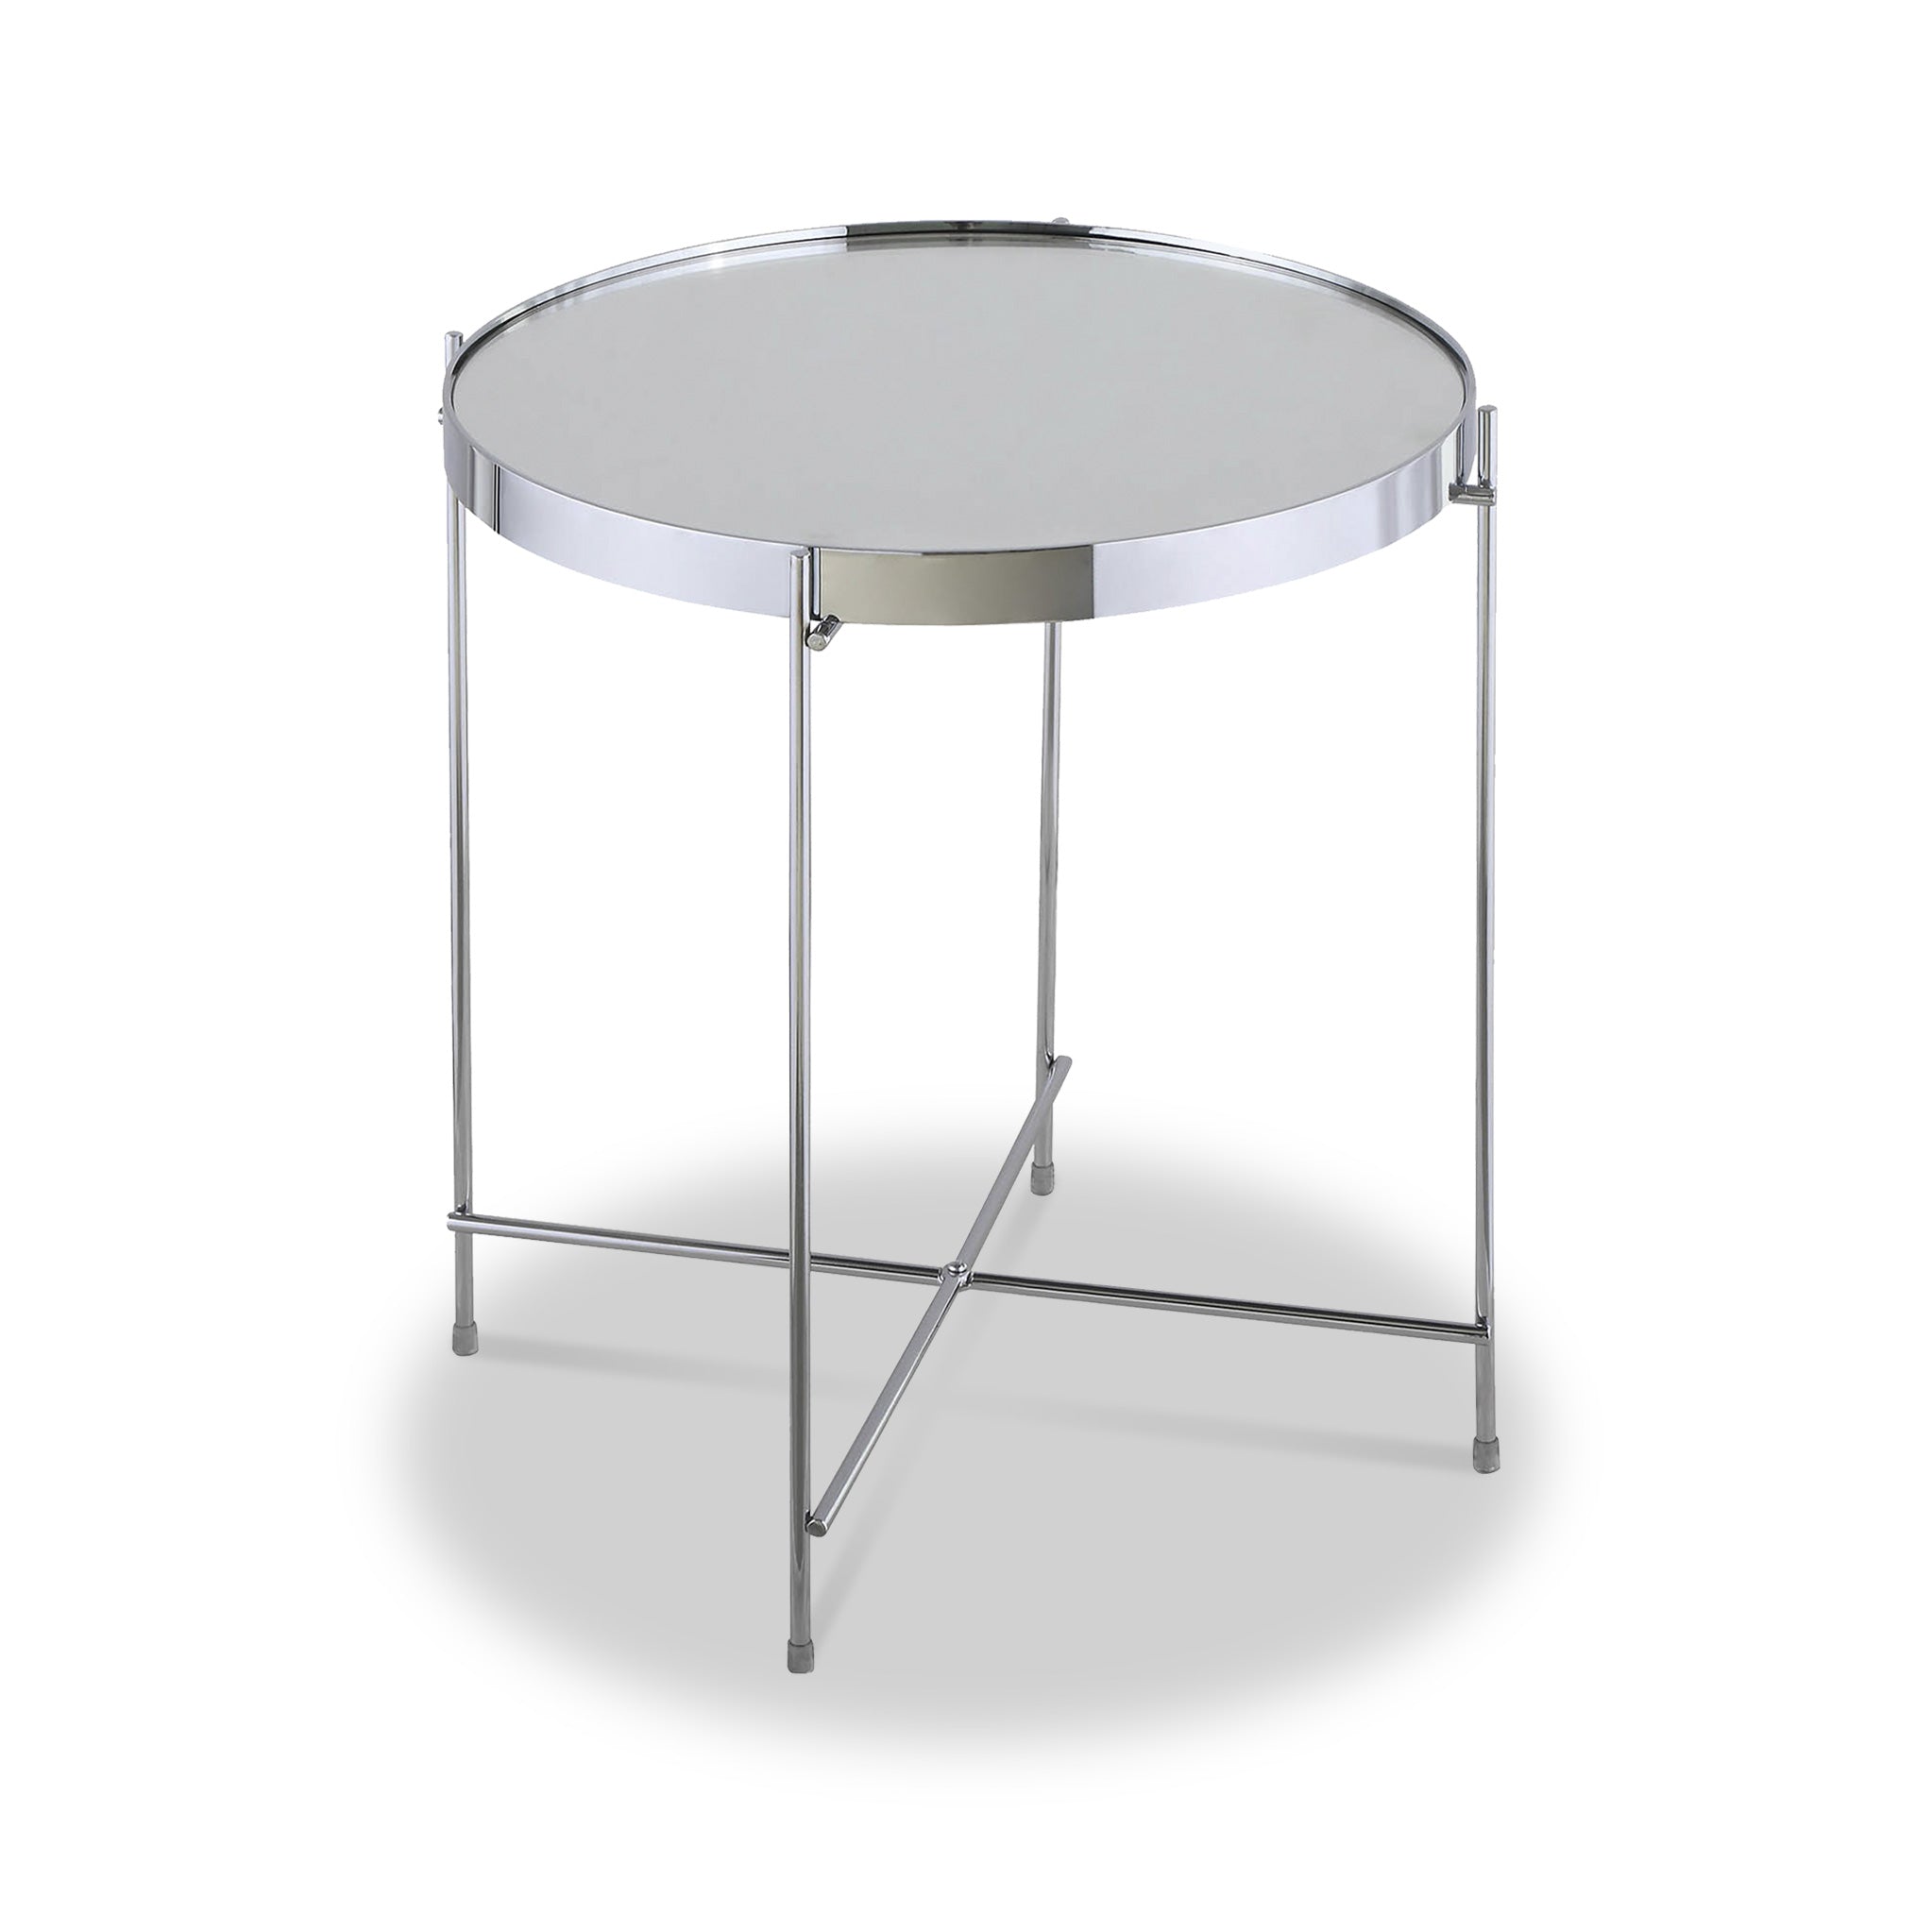 Arla Chic Mirrored Round Metal Lamp Side Table For Living Room